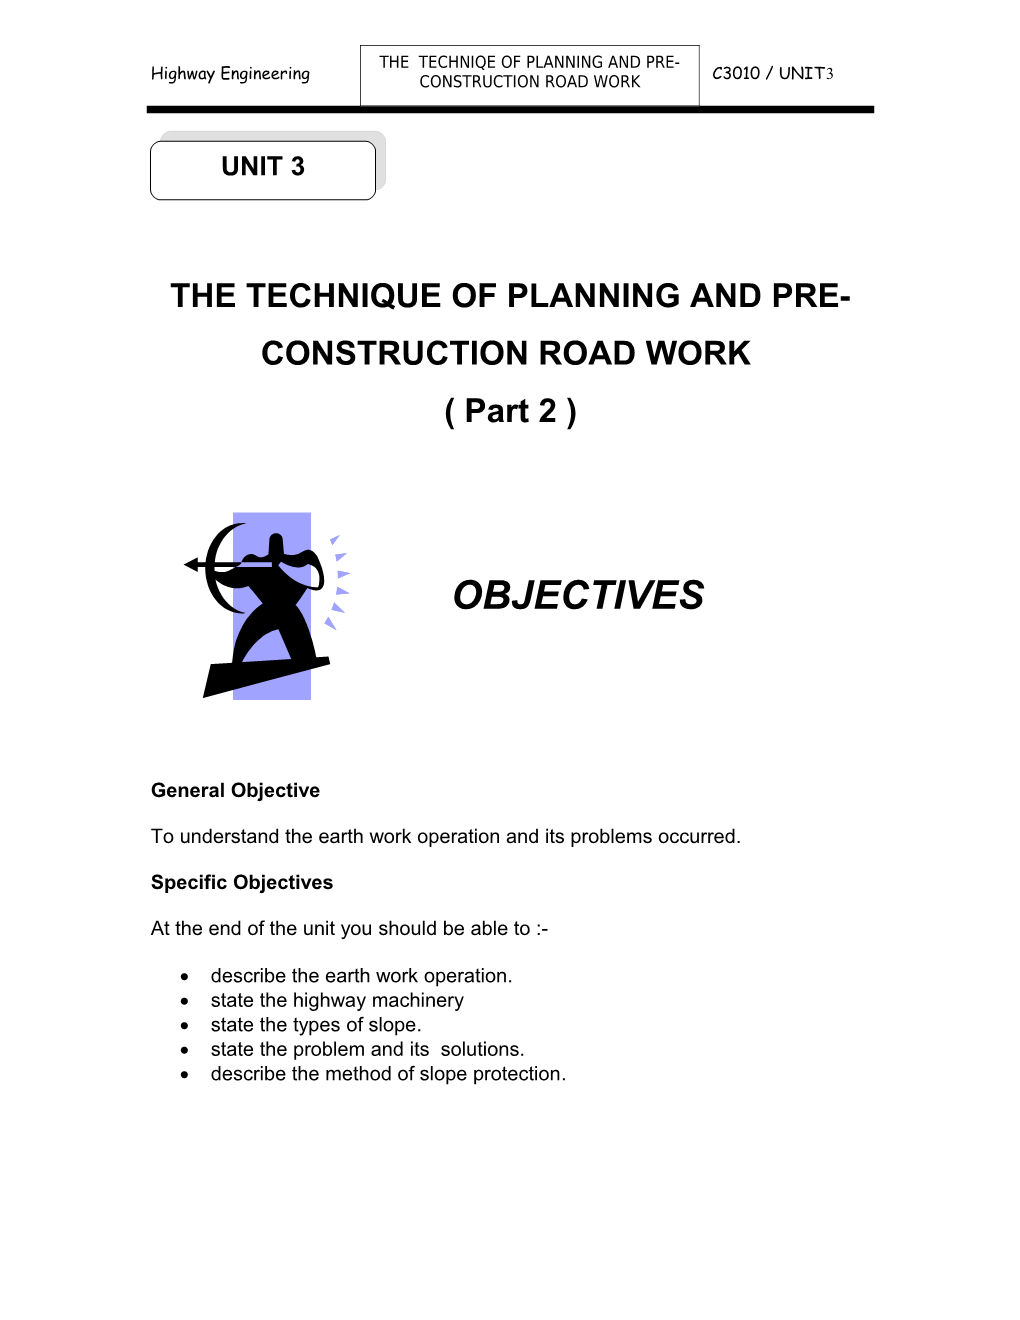 The Technique of Planning and Pre-Construction Road Work